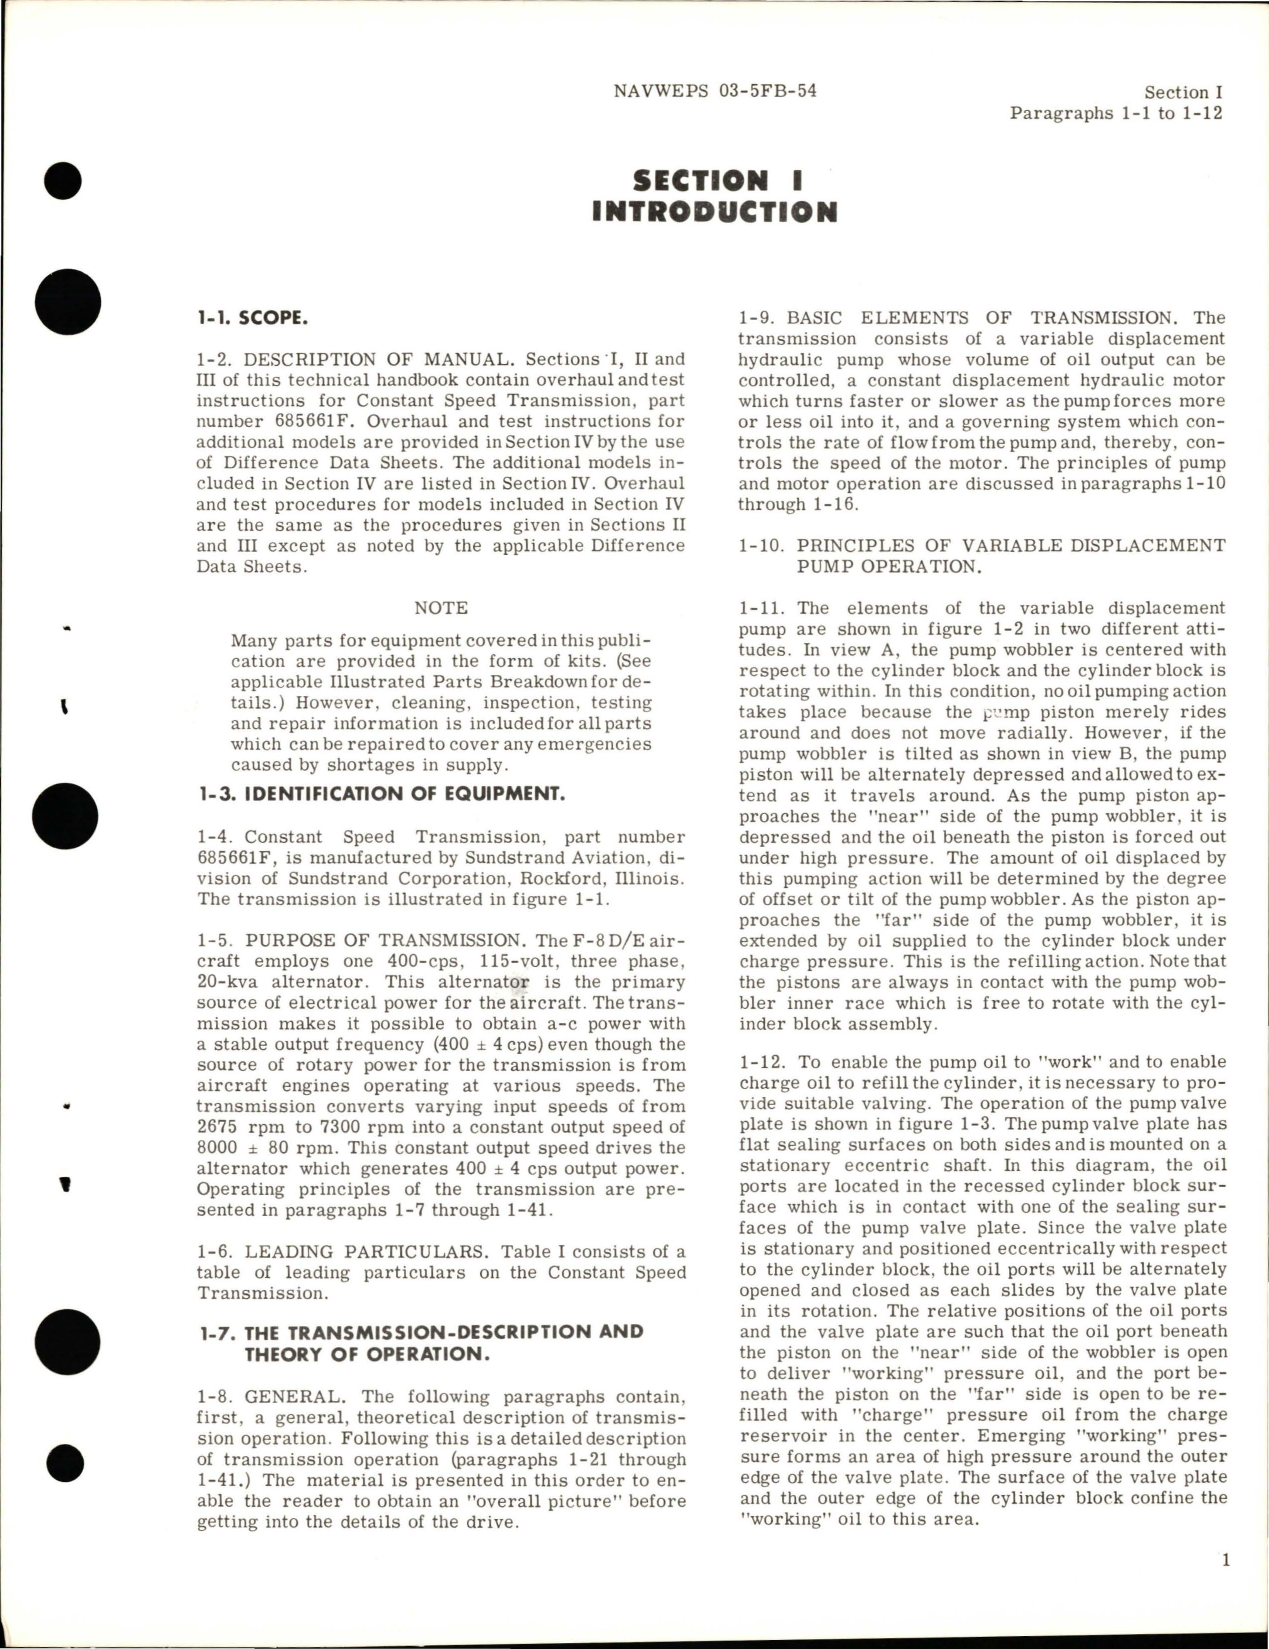 Sample page 7 from AirCorps Library document: Overhaul Instructions for Constant Speed Transmission - Parts 685661F, 685661E, 685661D